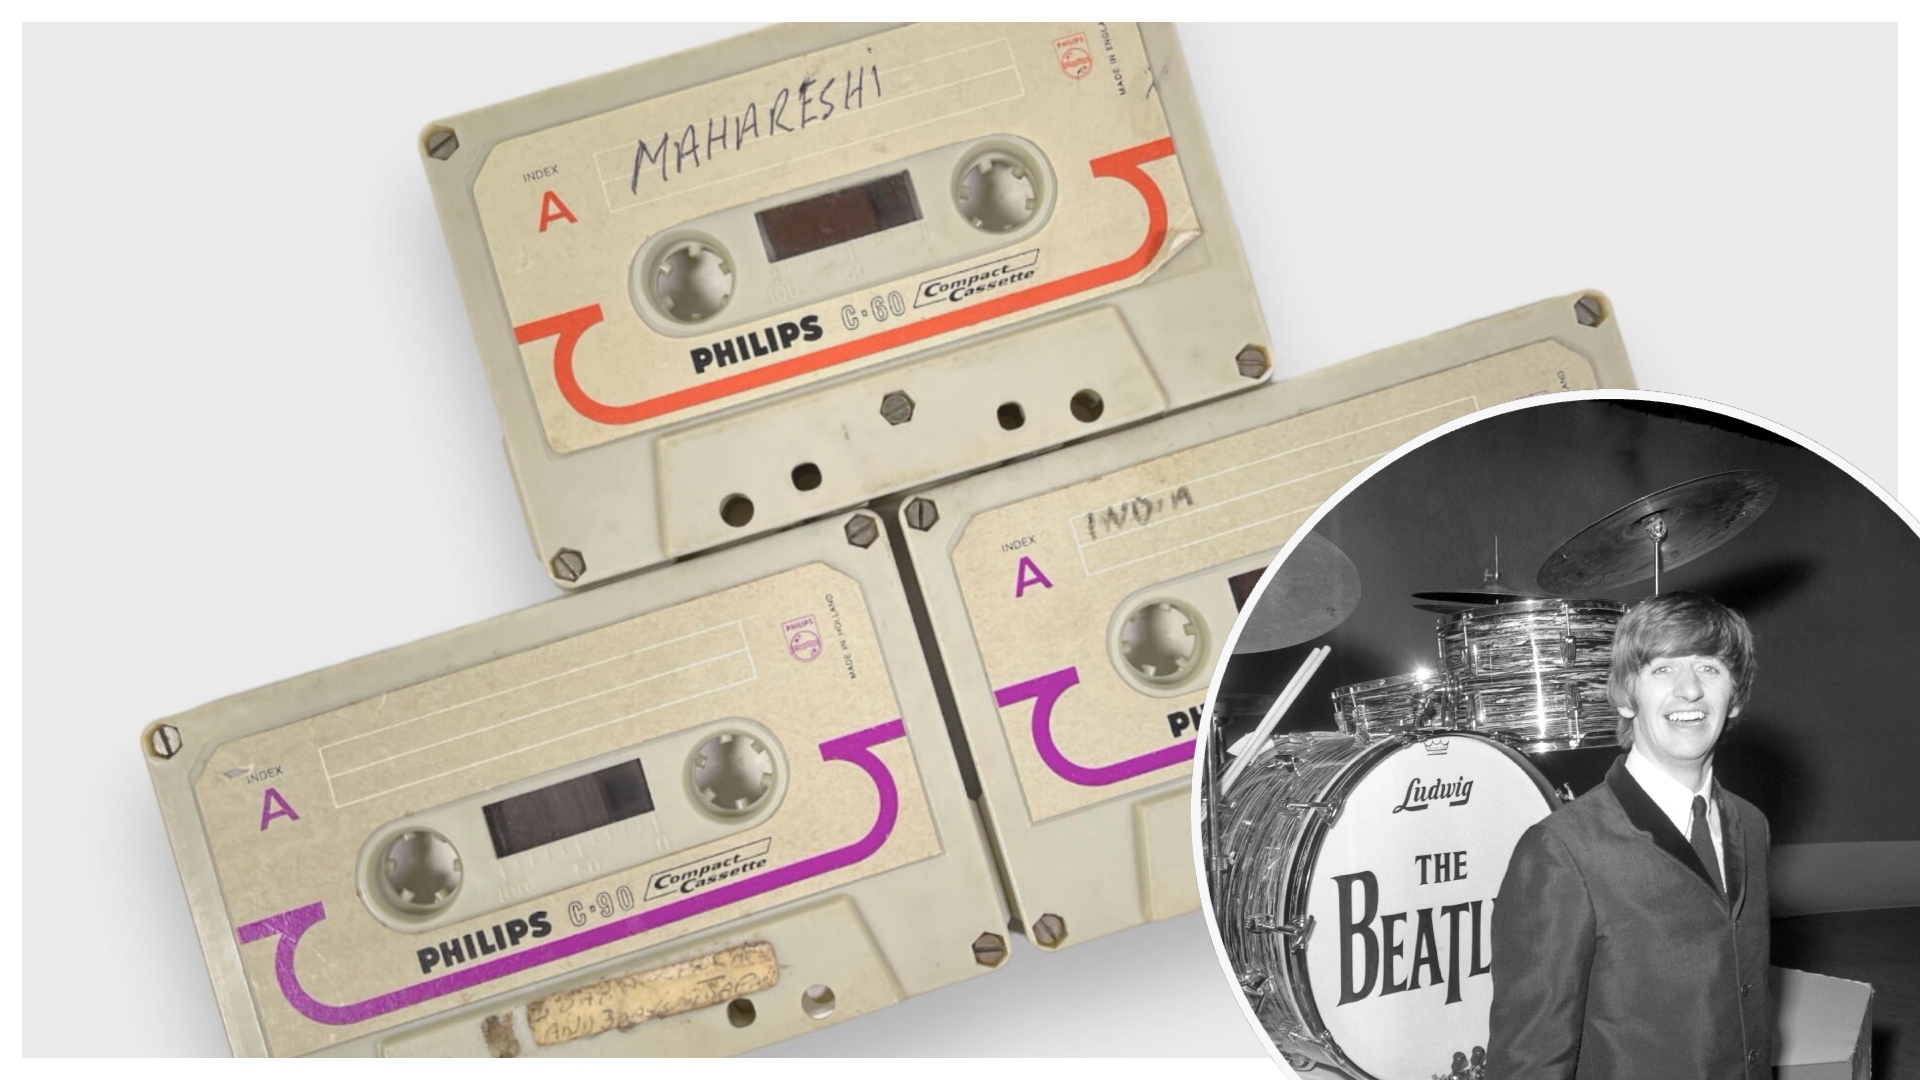 Previously unheard tapes made by Sir Ringo Starr fetch £10,000 in 